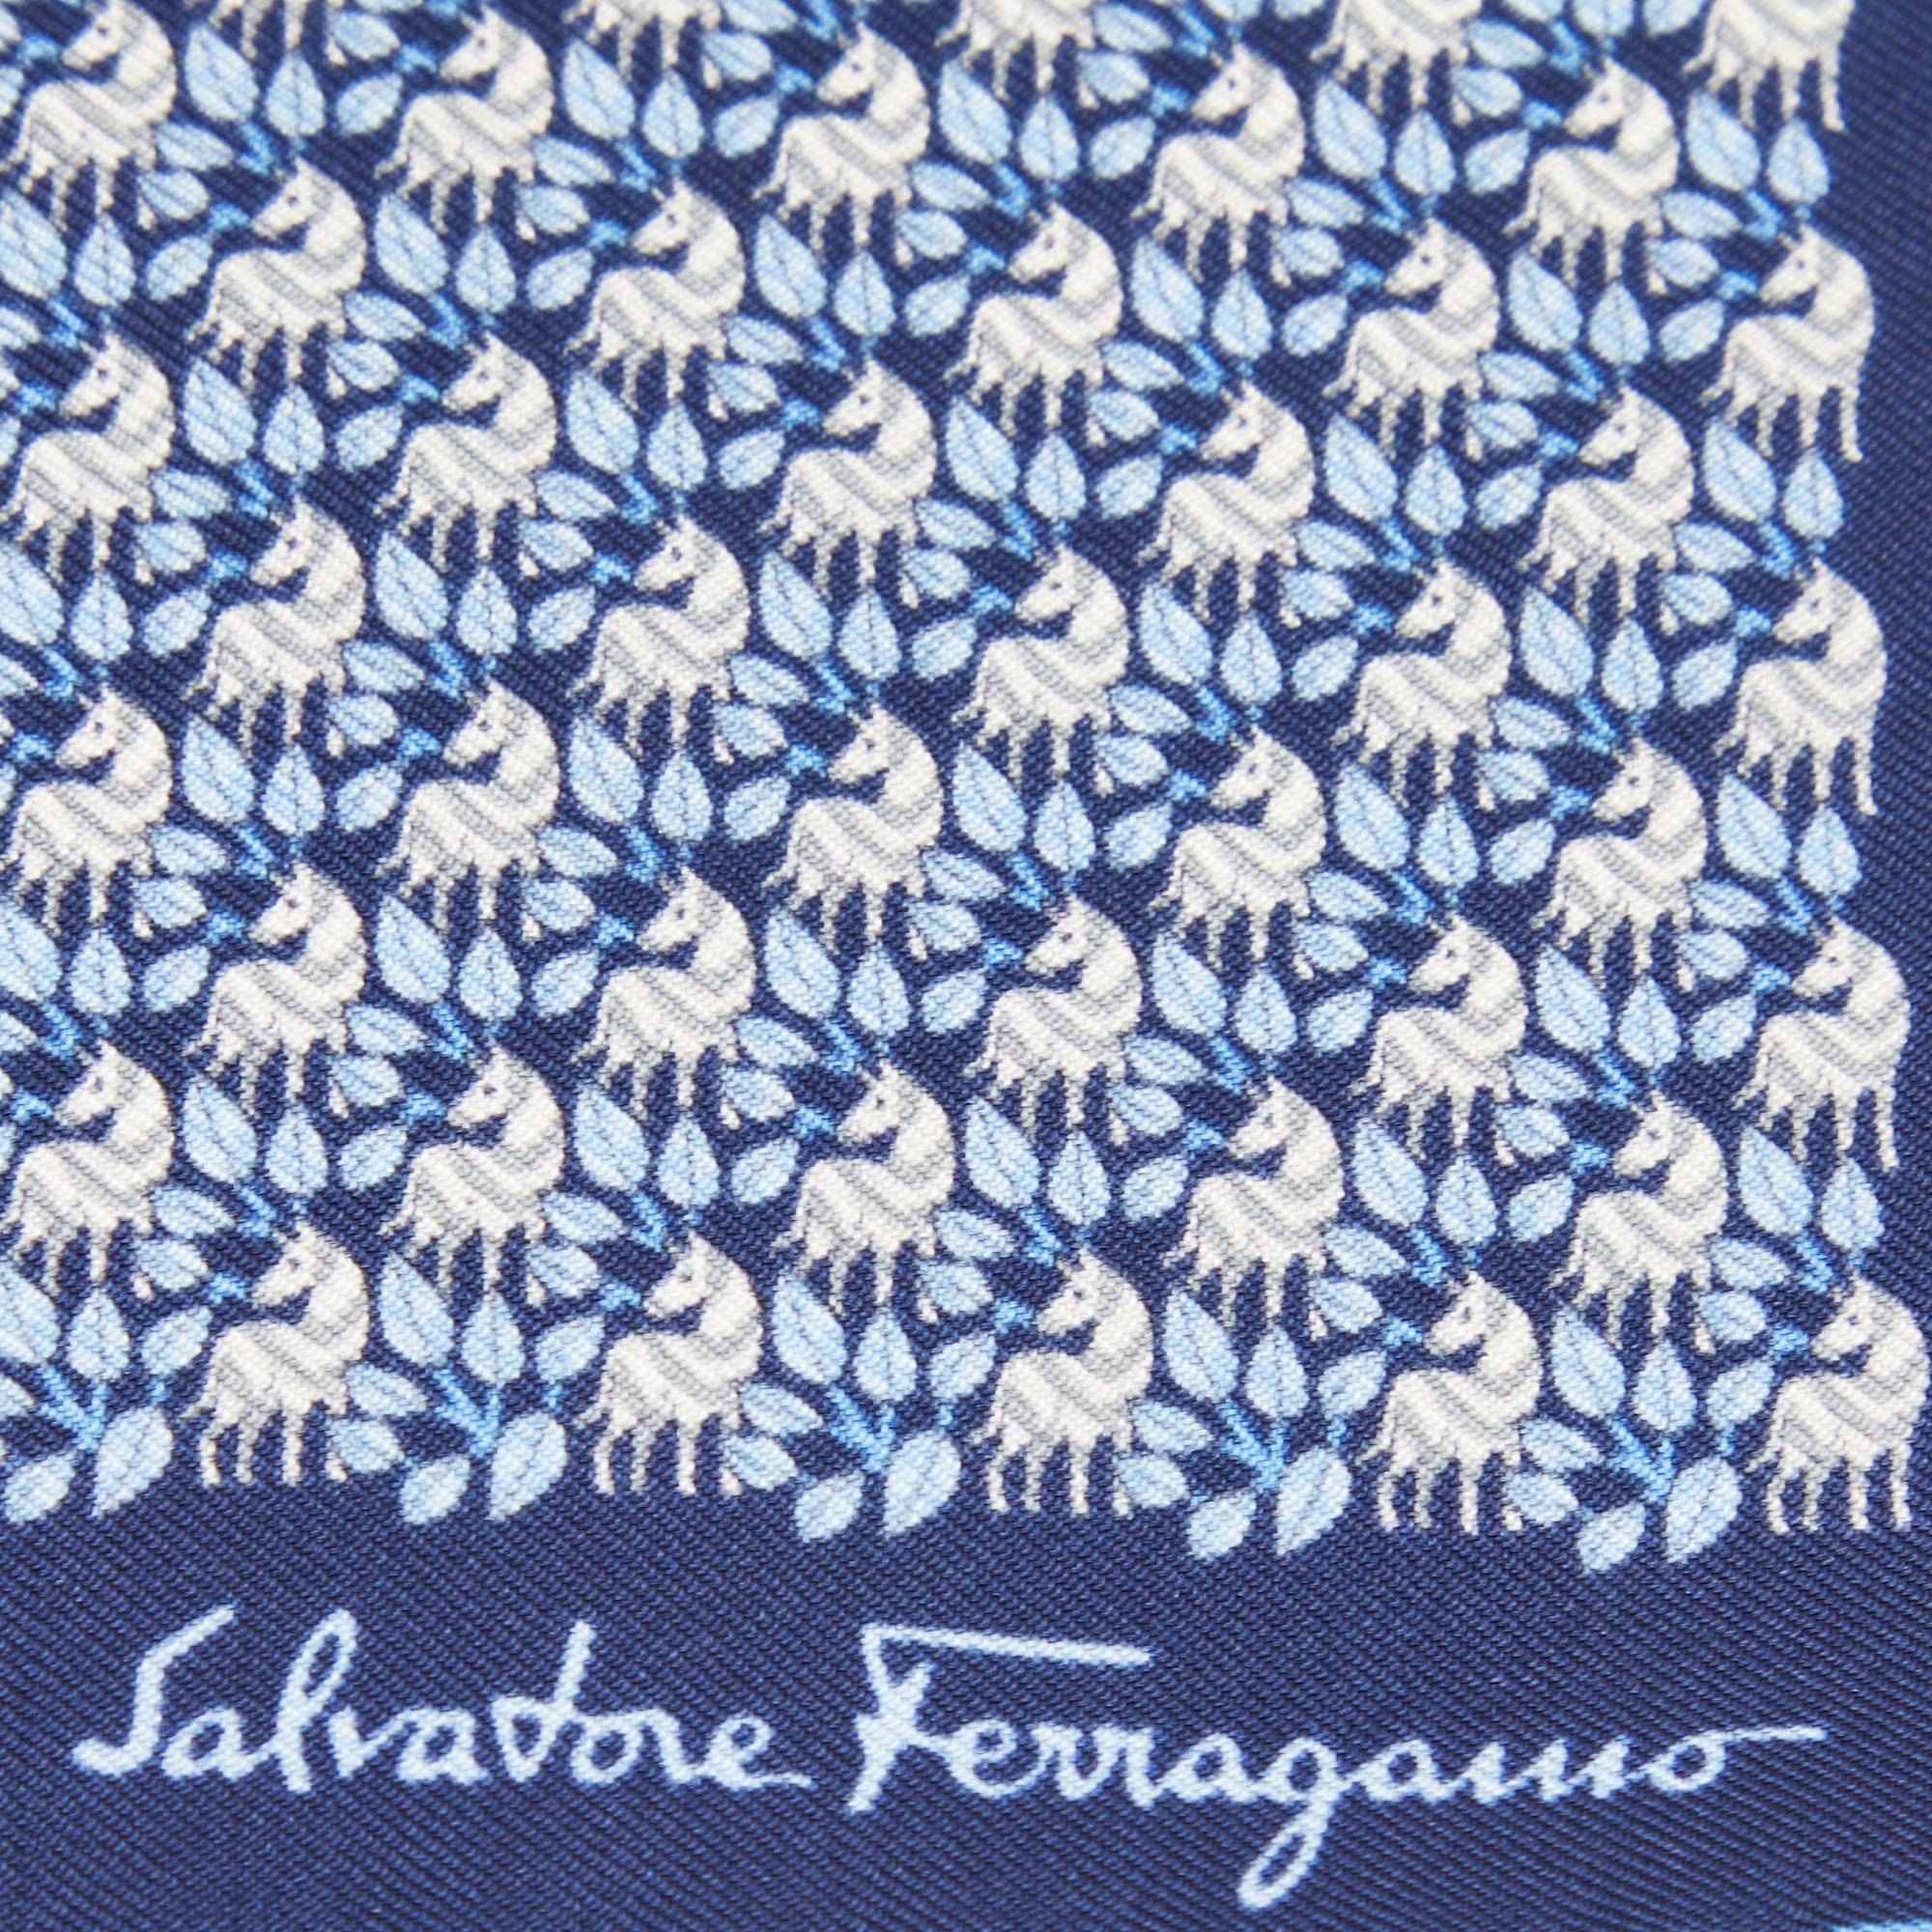 You can surely count on this stylish and adorable tie by Salvatore Ferragamo. Crafted with silk, it features adorable print and in a pleasing shade.

Includes
Original Box, Info Booklet, Brand Tag